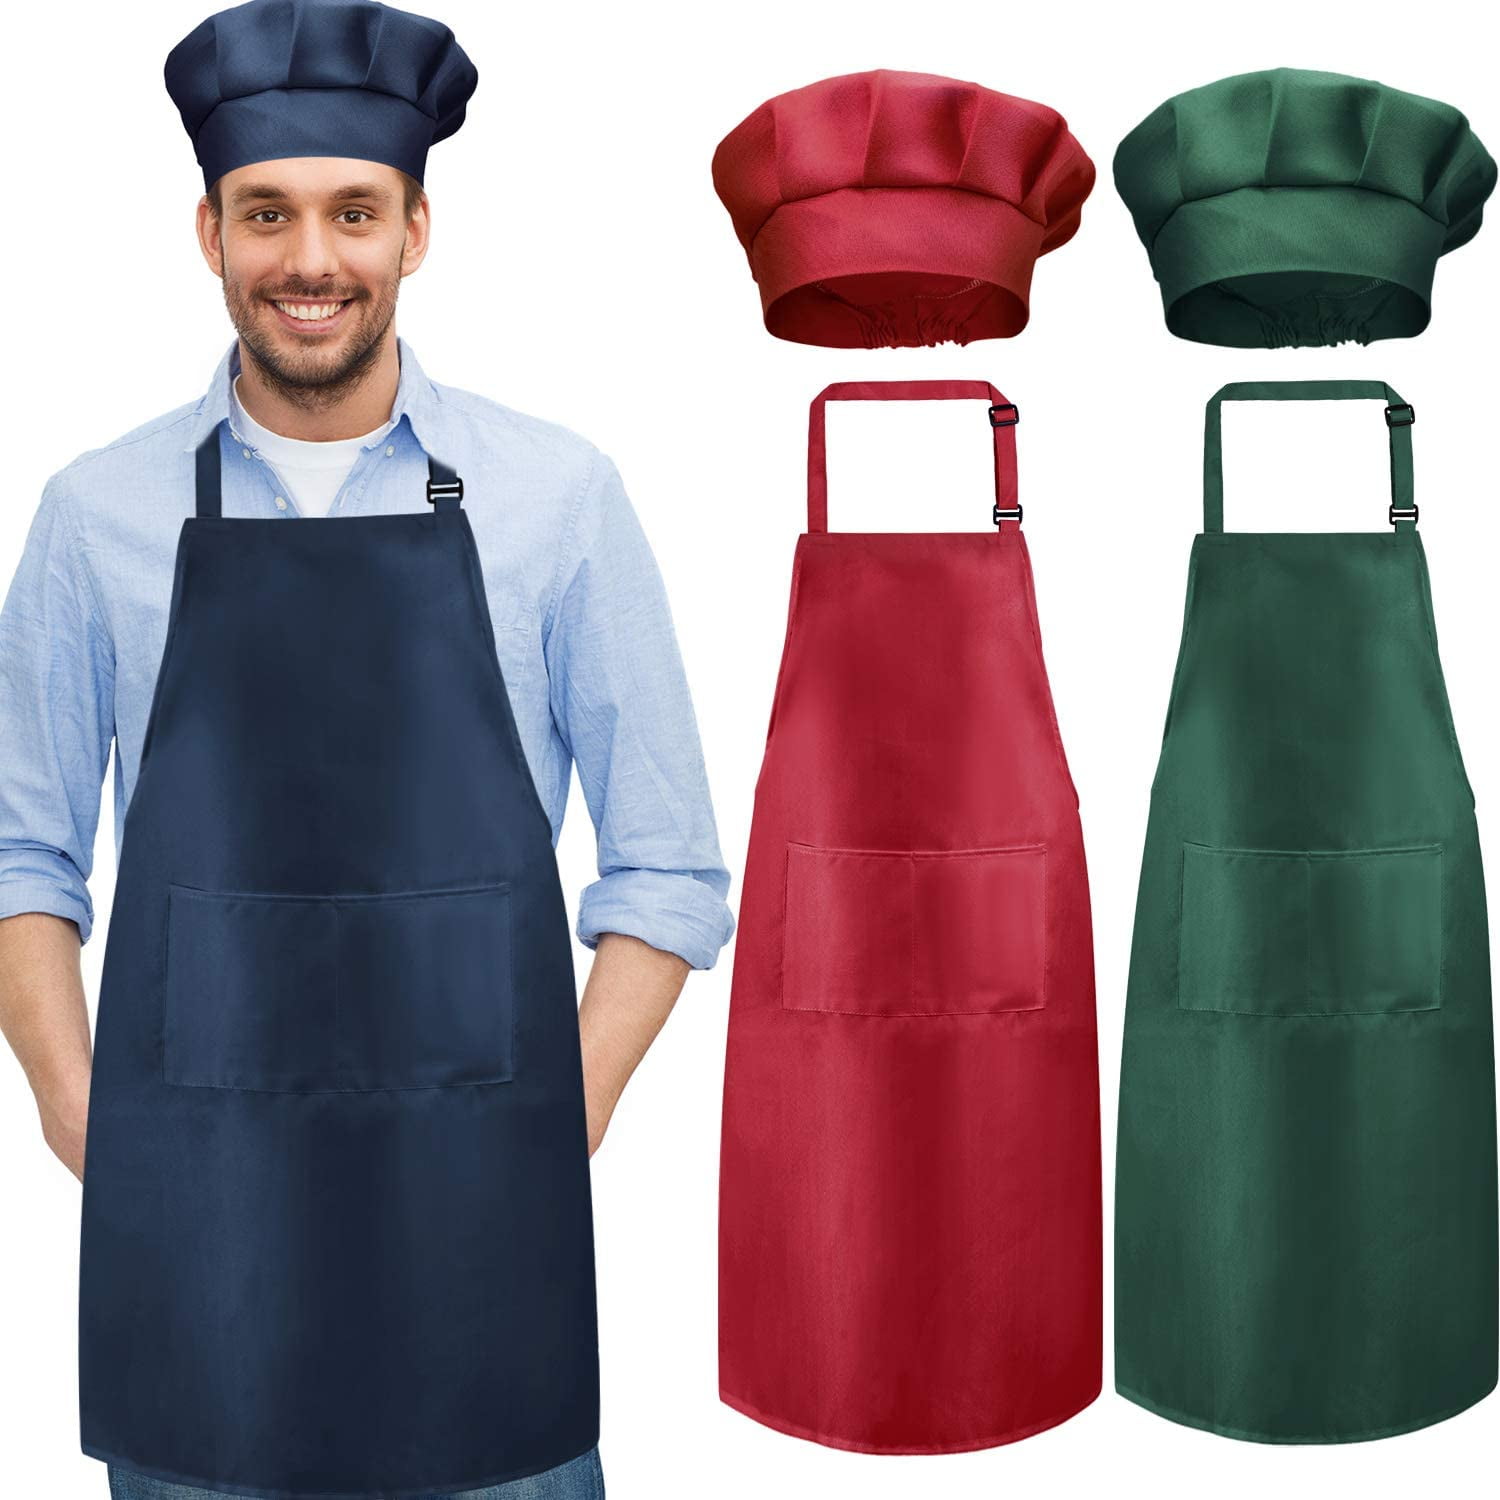 Chefs Aprons Plain Front Pockets Kitchen Butcher cooking BBQ Stuff Full Aprons 